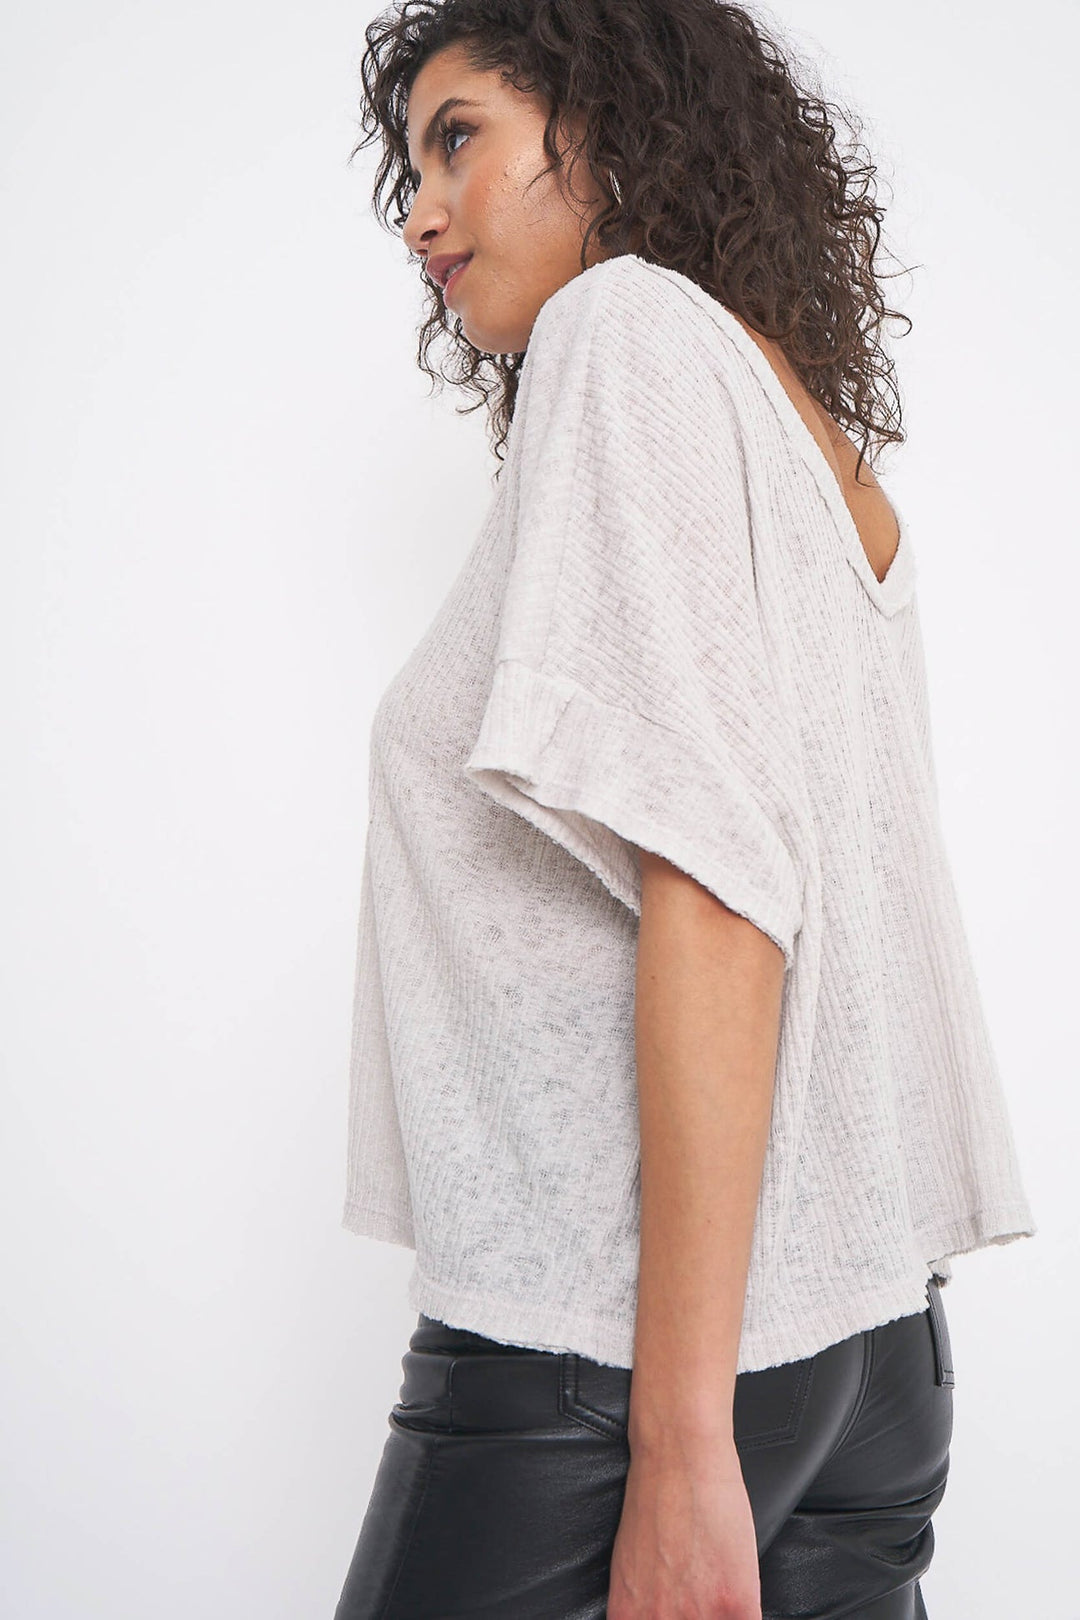 EASY TO LOVE DOUBLE V RIB TEE - Kingfisher Road - Online Boutique